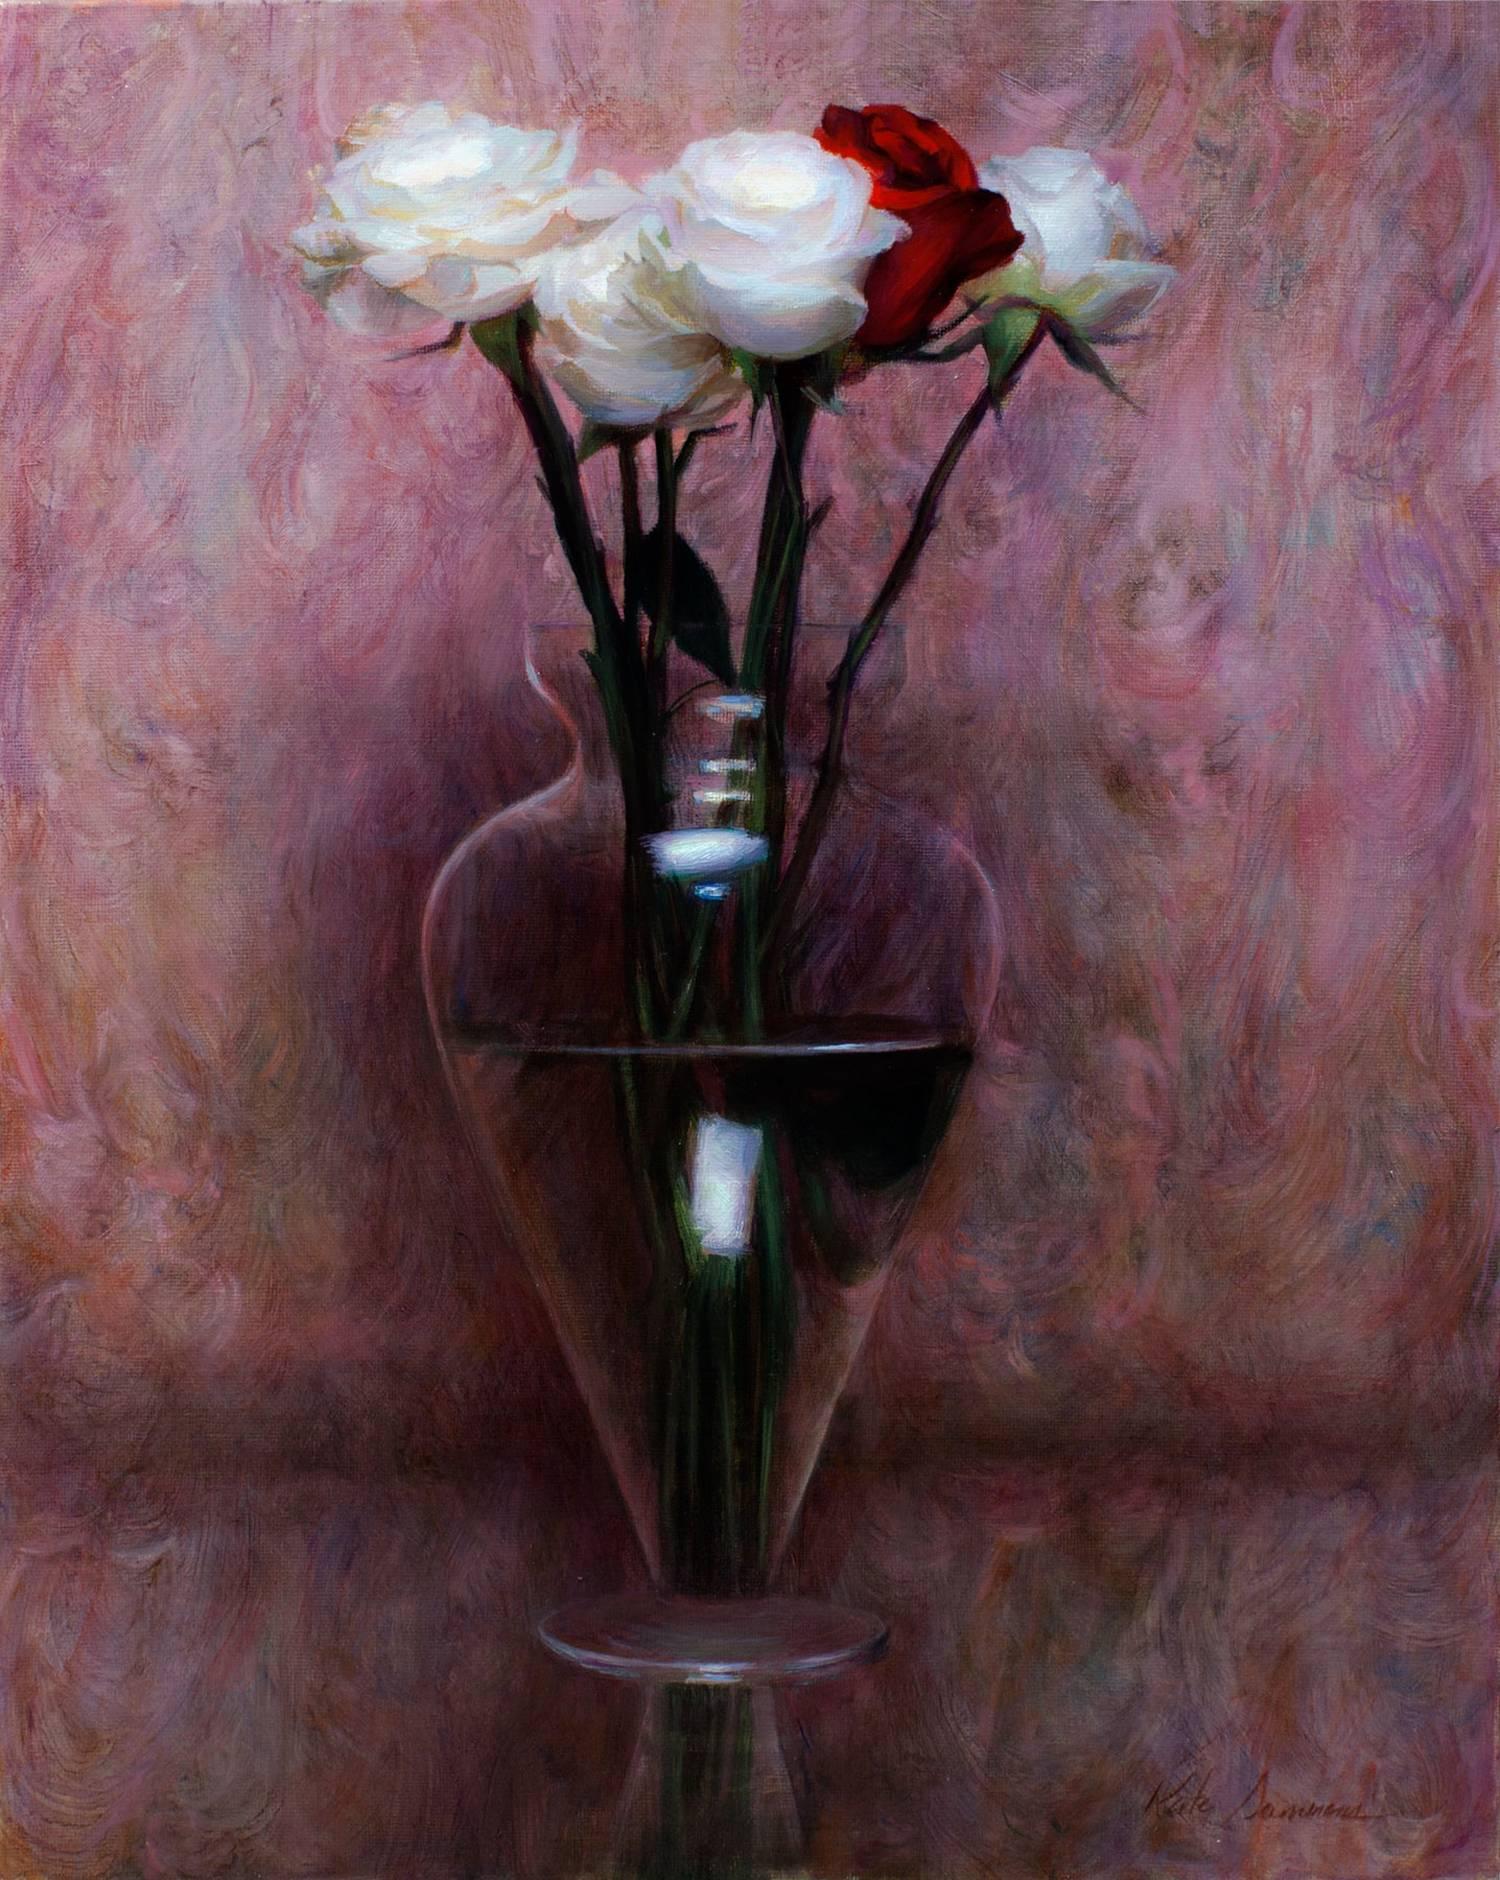 Bohemian Roses - Painting by Kate Sammons